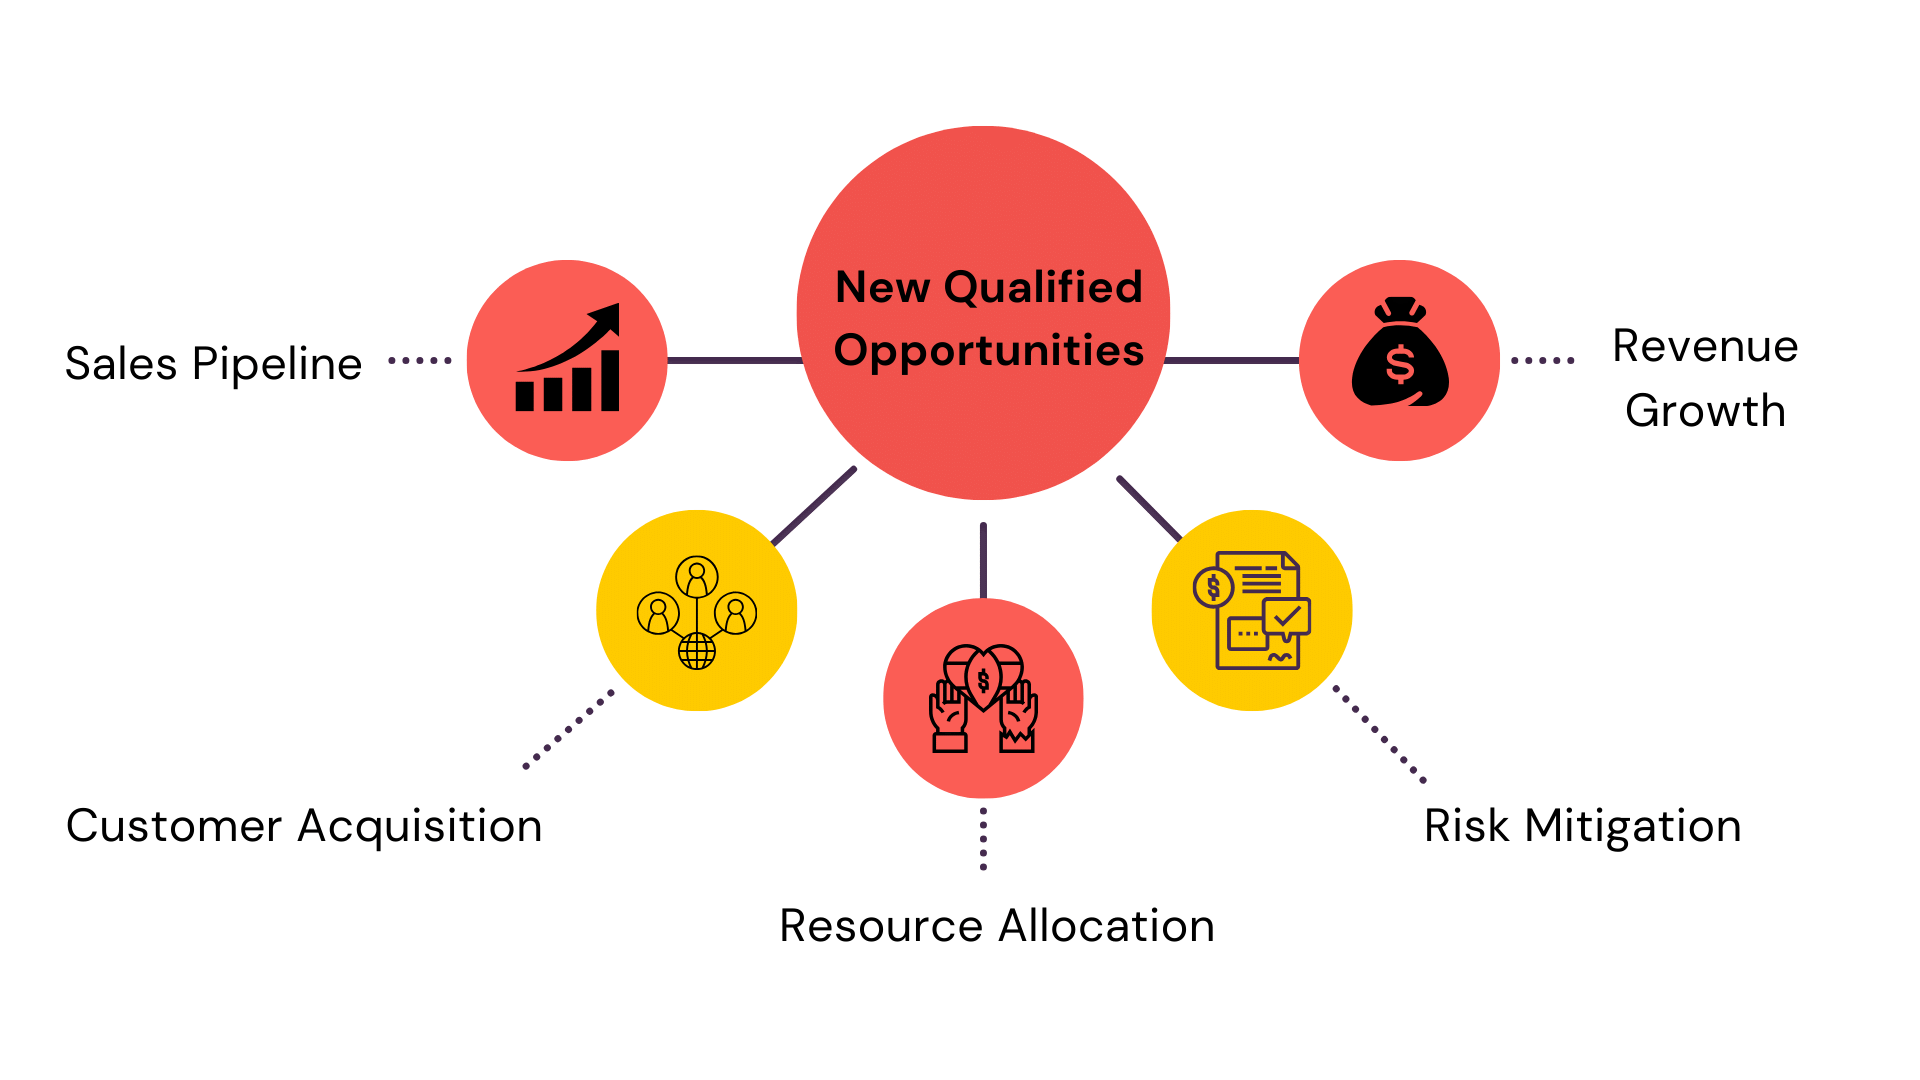 New Qualified Opportunities